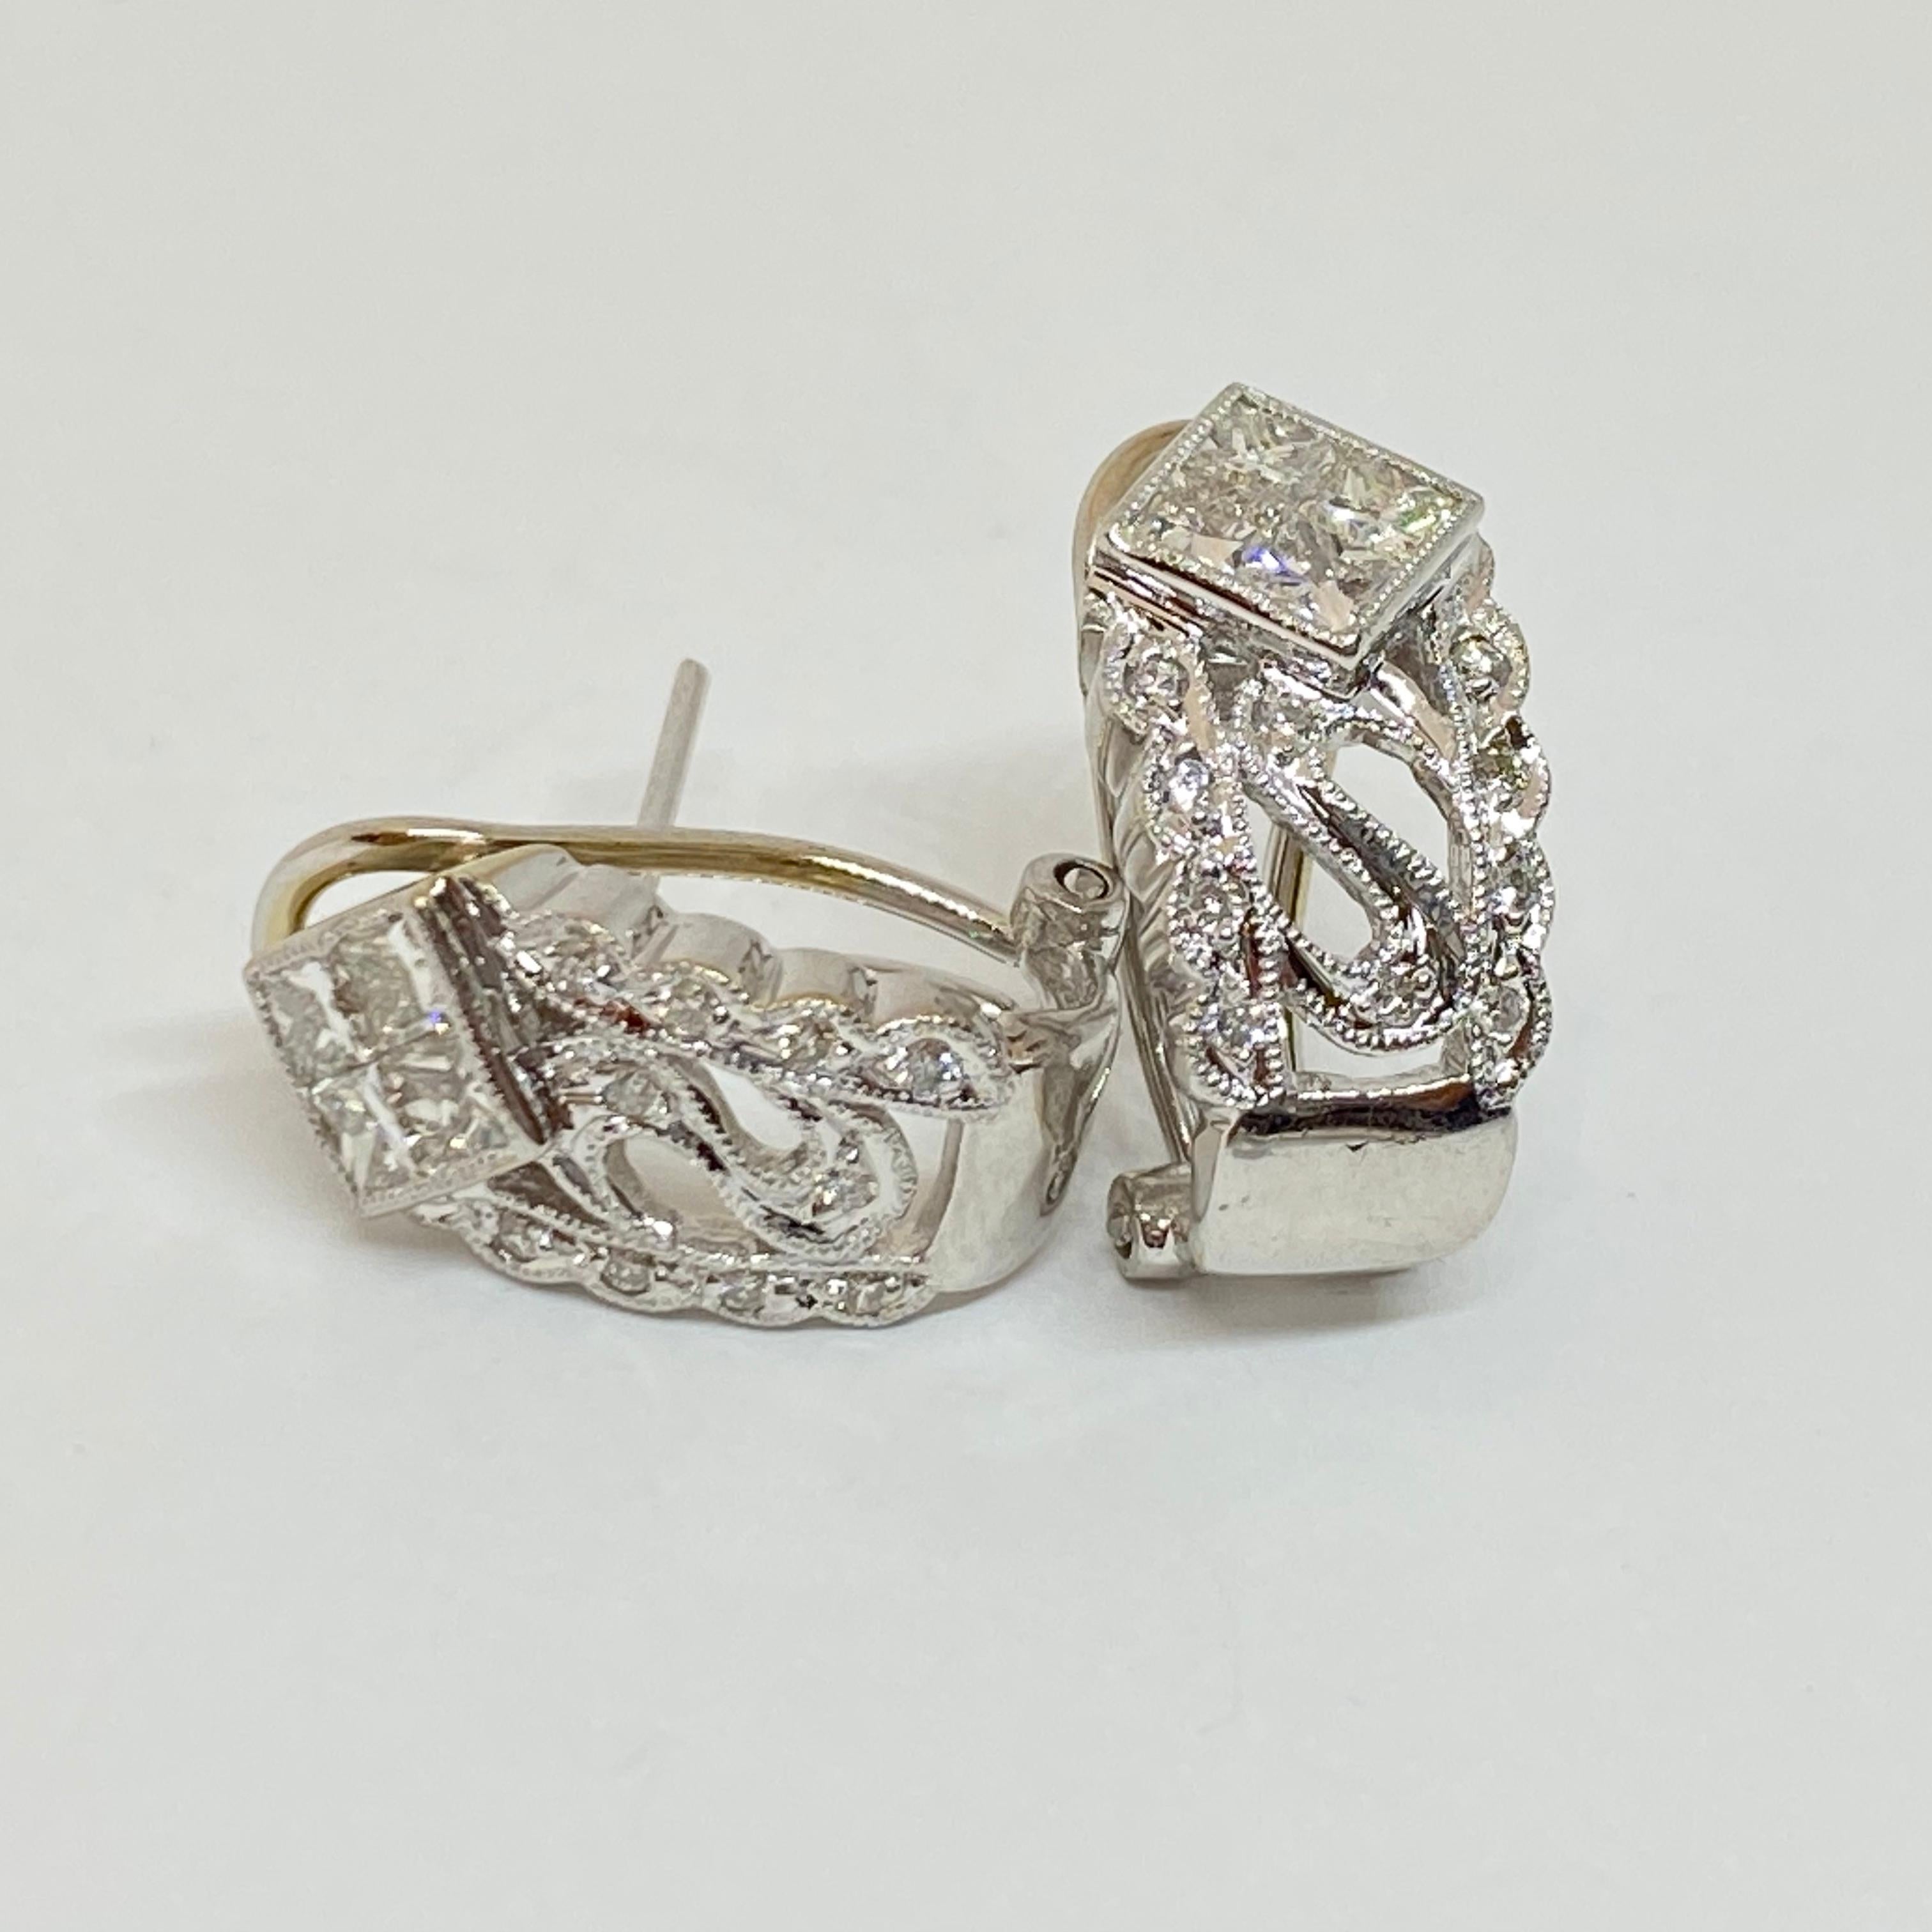 Estate diamond earrings designed in 14 karat white gold. Square princess and round brilliant cut diamonds are set in cutout filigree wide huggie earrings. French omega clip post earrings. The earrings measure 9mm x 16mm. The diamonds weigh 1.00